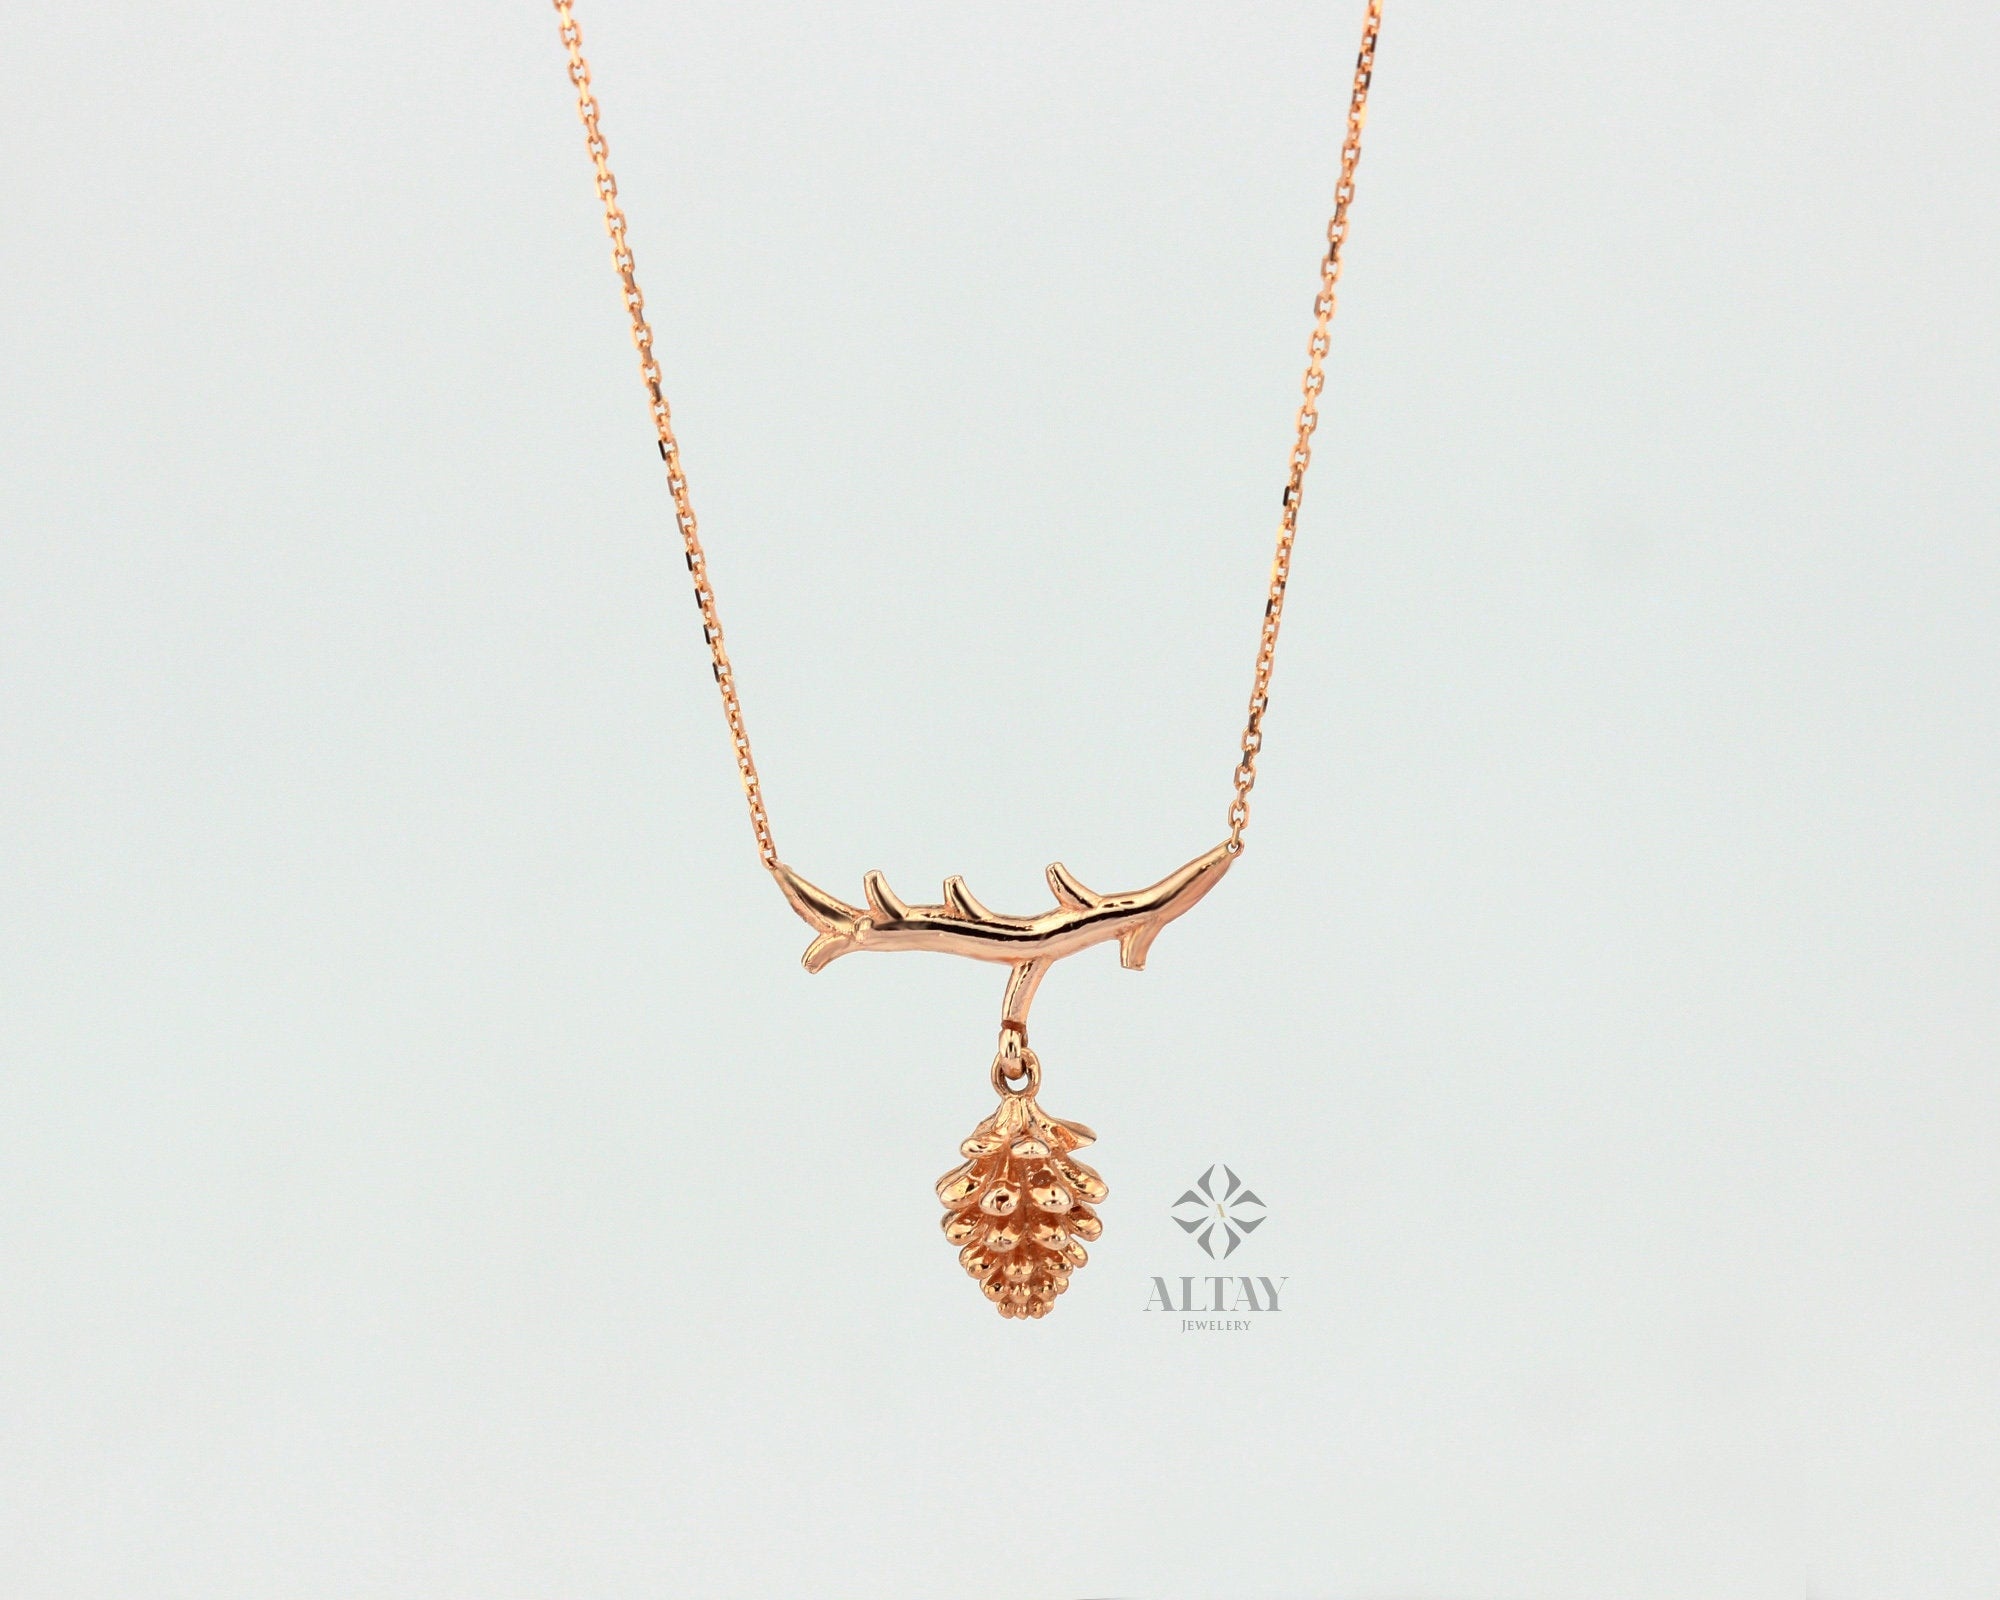 14K Solid Gold Pine Cone Necklace, Tree Charm Pendant, Chain Necklace, Delicate Pendant, Anniversary, Minimalist Gift For Her, Jewelry